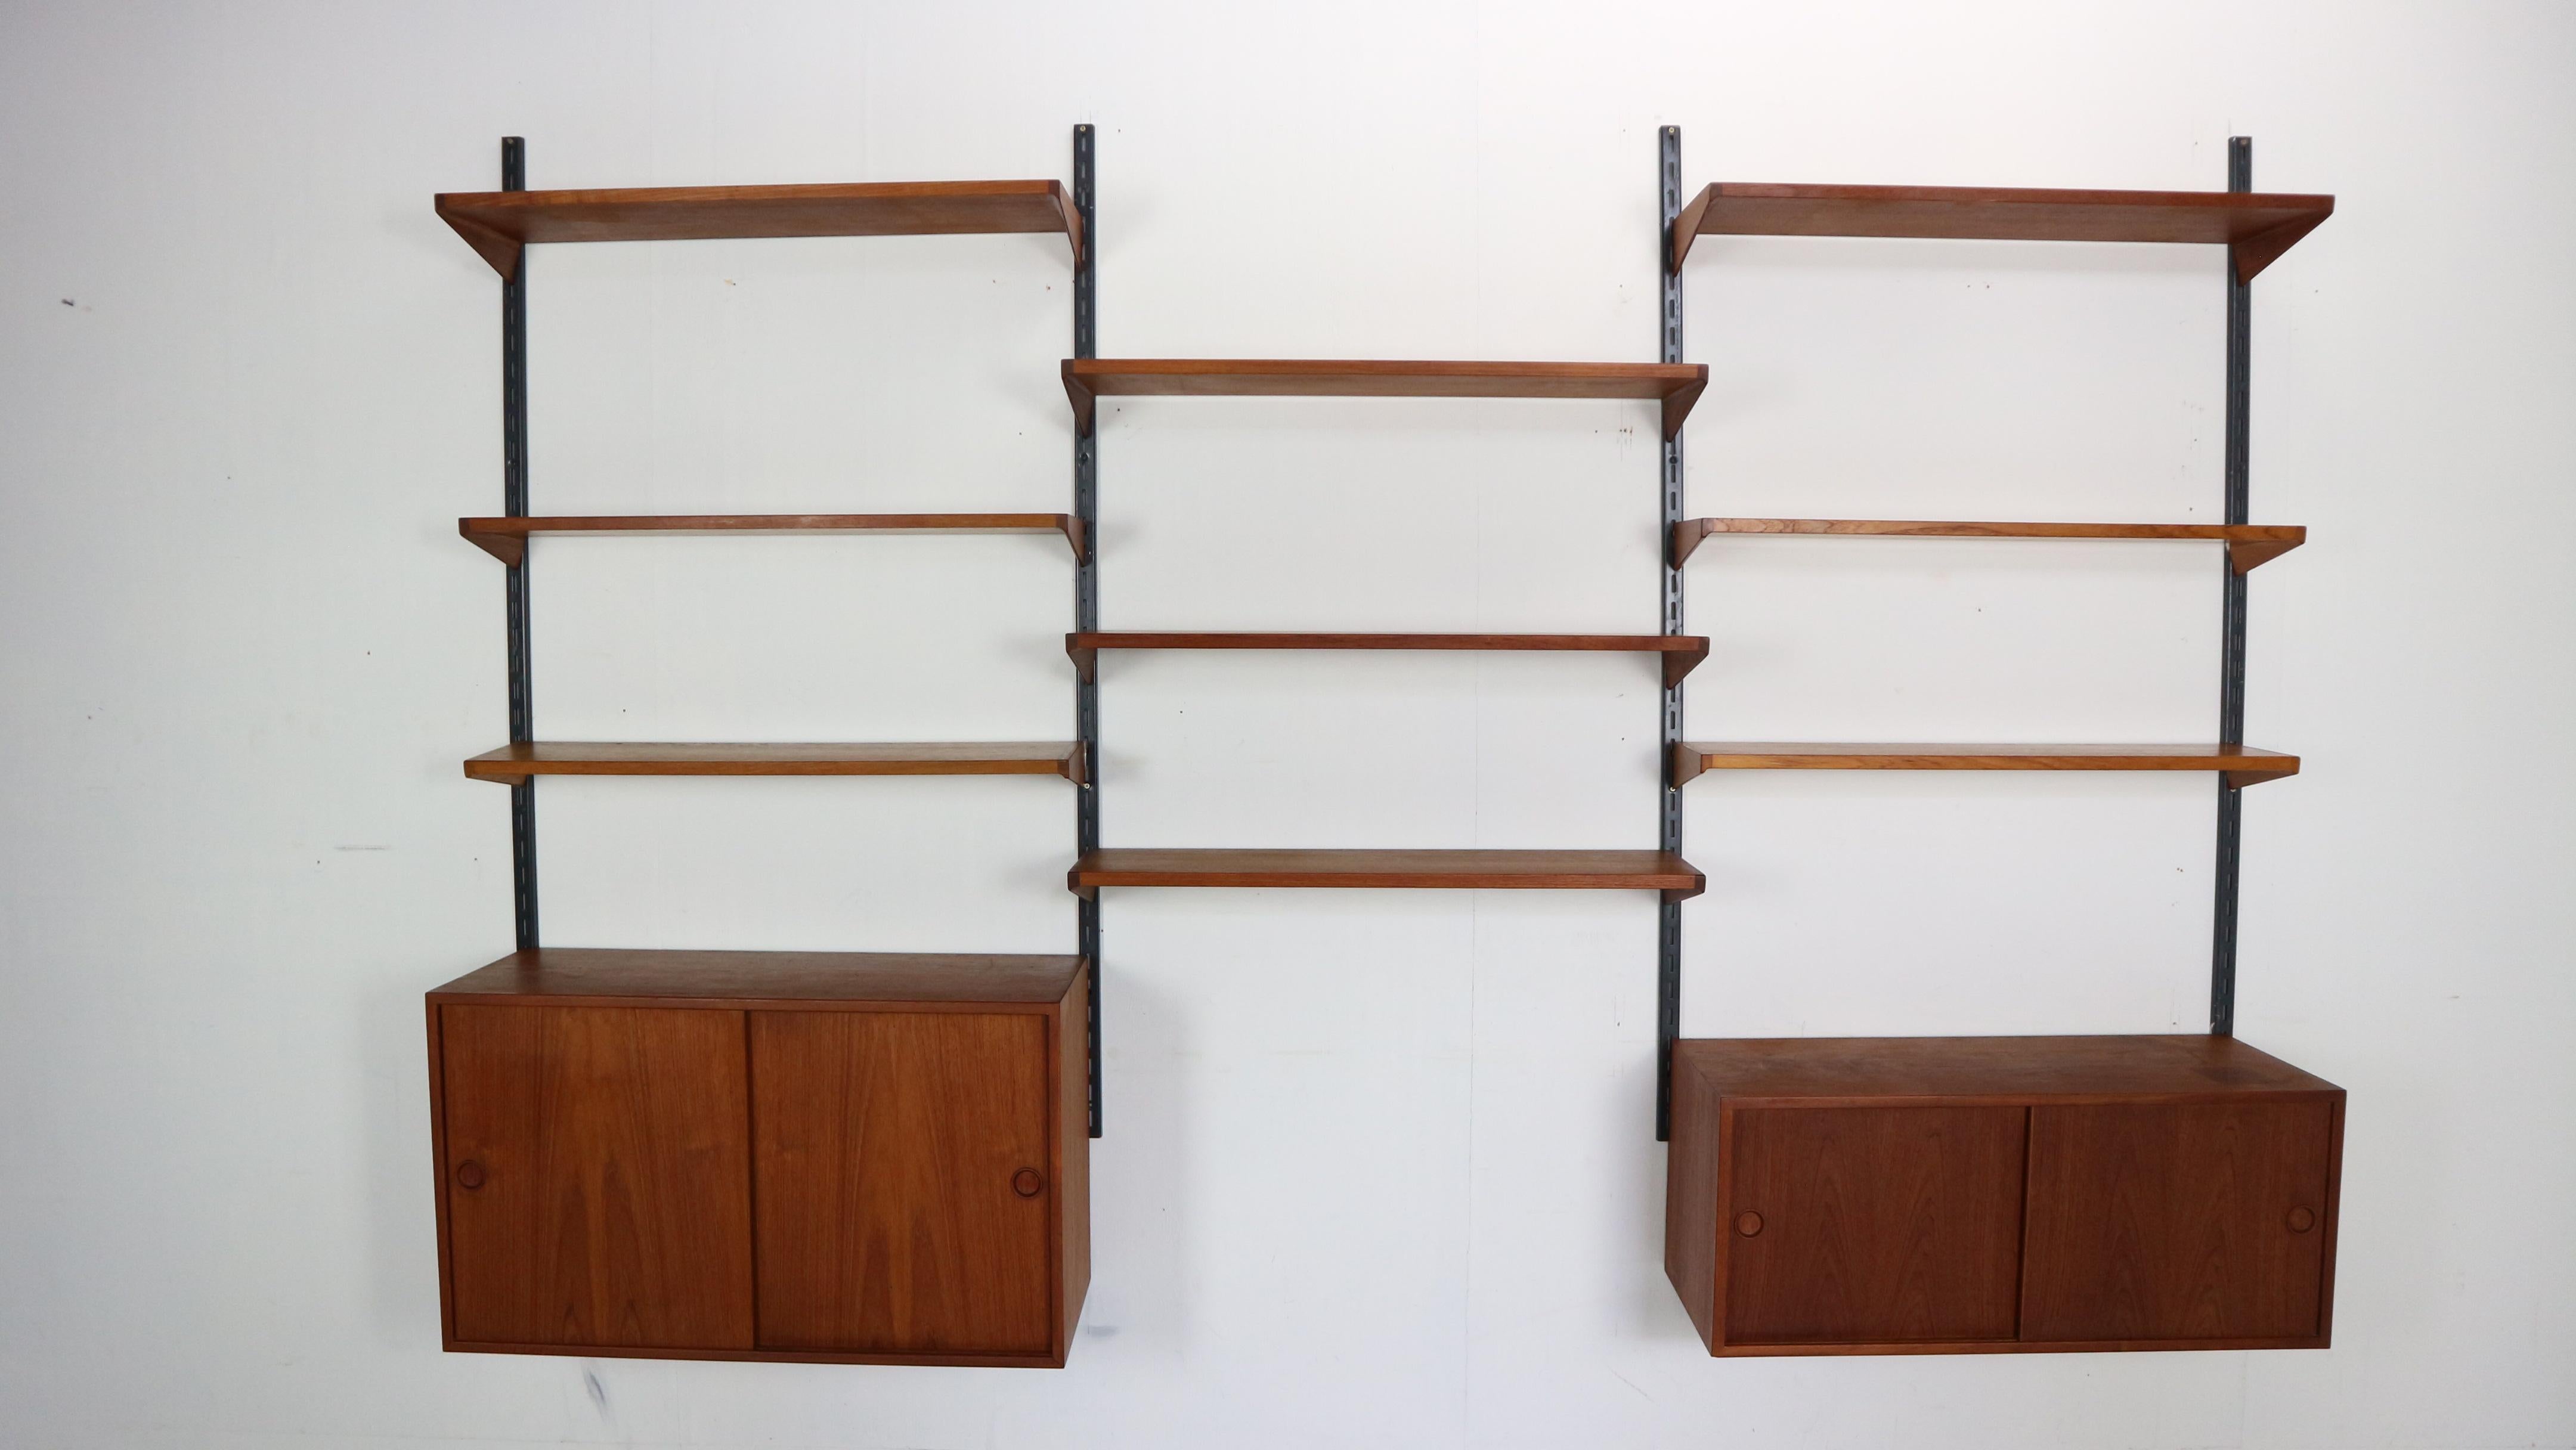 Mid-Century modern period famous danish furniture designer Kai Kristiansen design this gorgeous and very practical wall unit shelving system.
It was manufactured by Feldballes Møbelfabrik in 1960's period, Denmark.

Whole system is made of teak wood